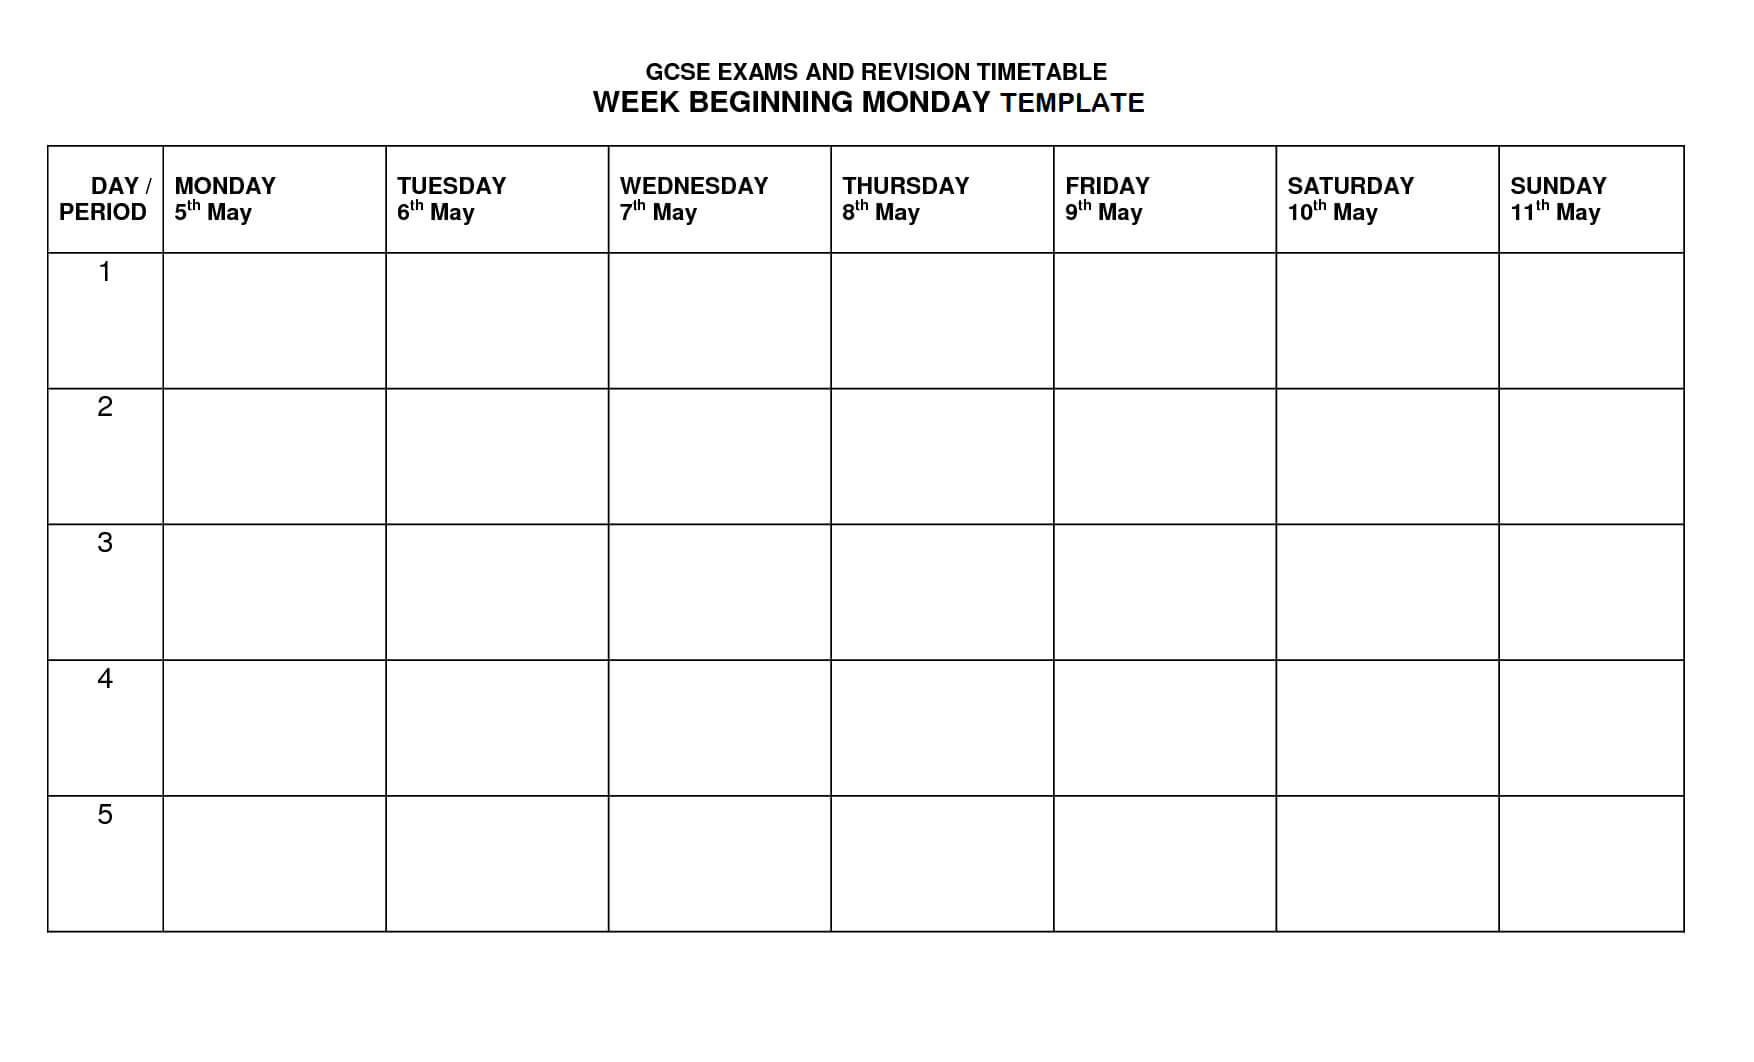 Timetable Template | Timetable Templates | Timetable With Regard To Blank Revision Timetable Template